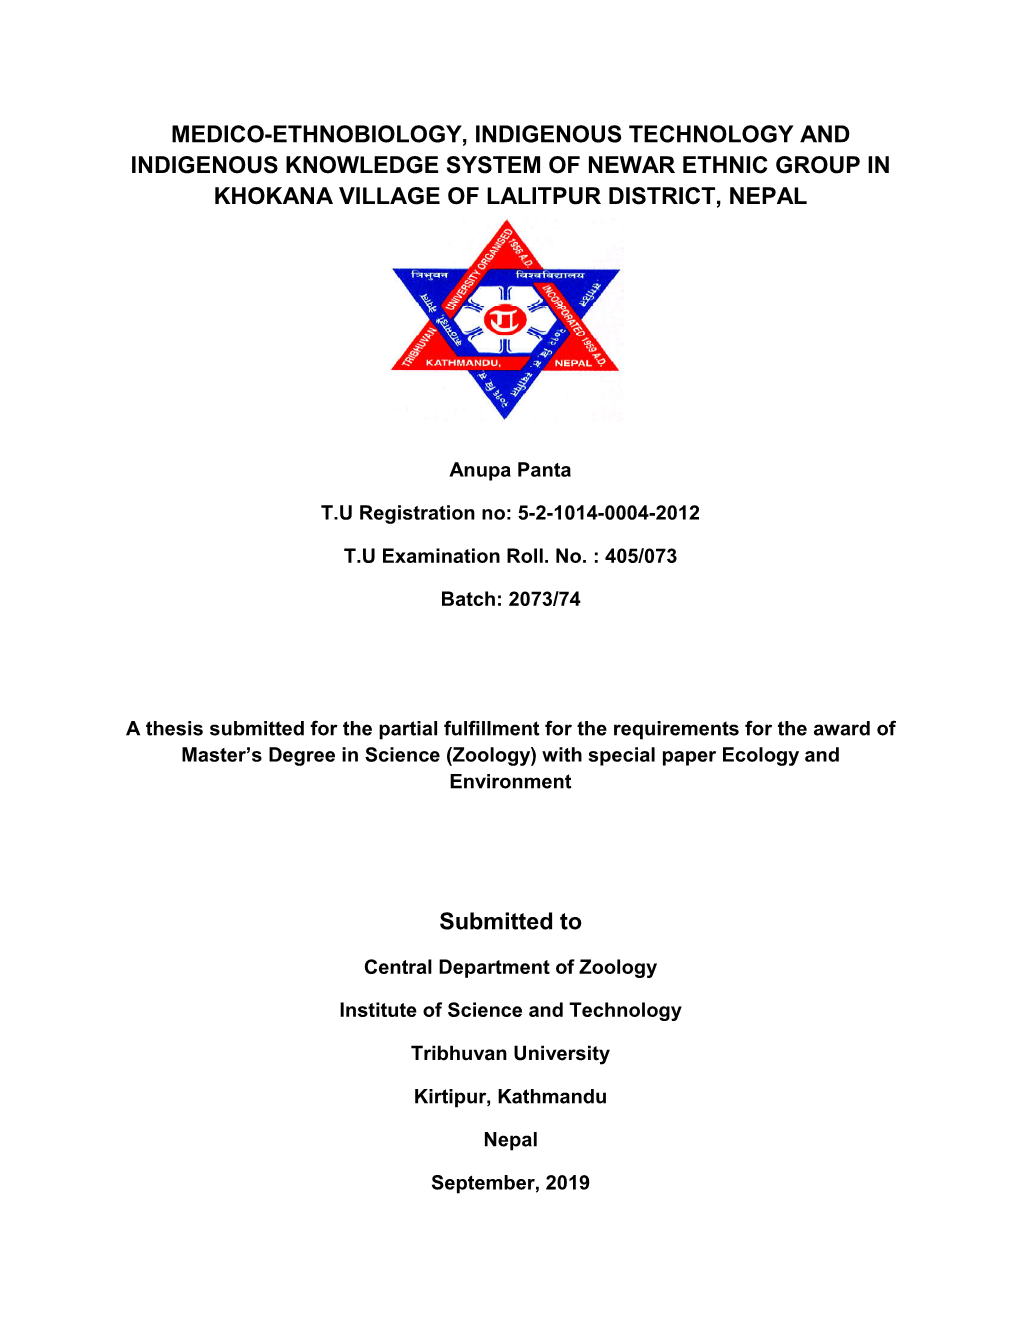 Medico-Ethnobiology, Indigenous Technology and Indigenous Knowledge System of Newar Ethnic Group in Khokana Village of Lalitpur District, Nepal